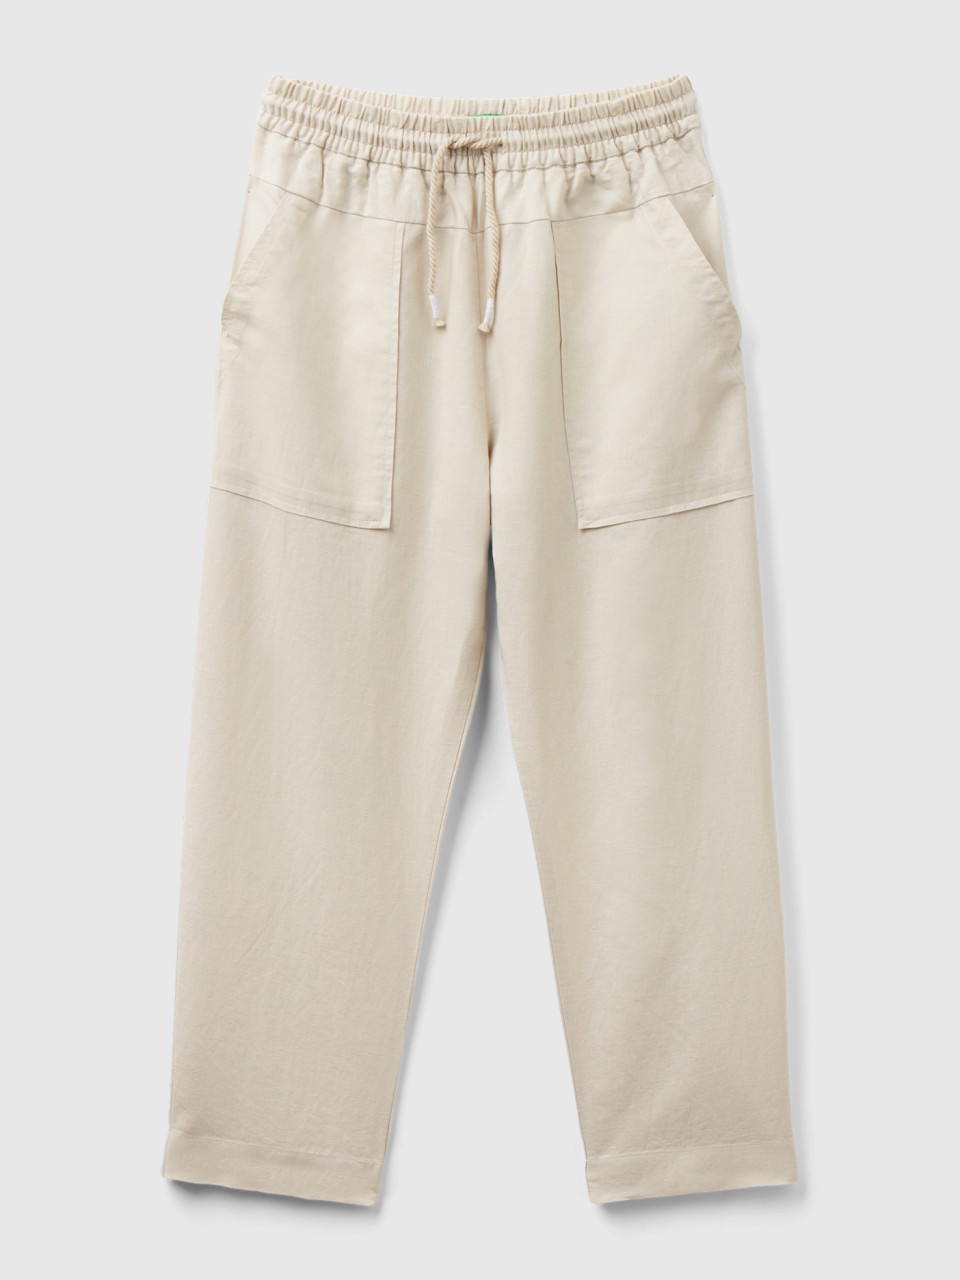 Benetton, Trousers In Linen Blend With Drawstring, Beige, Kids